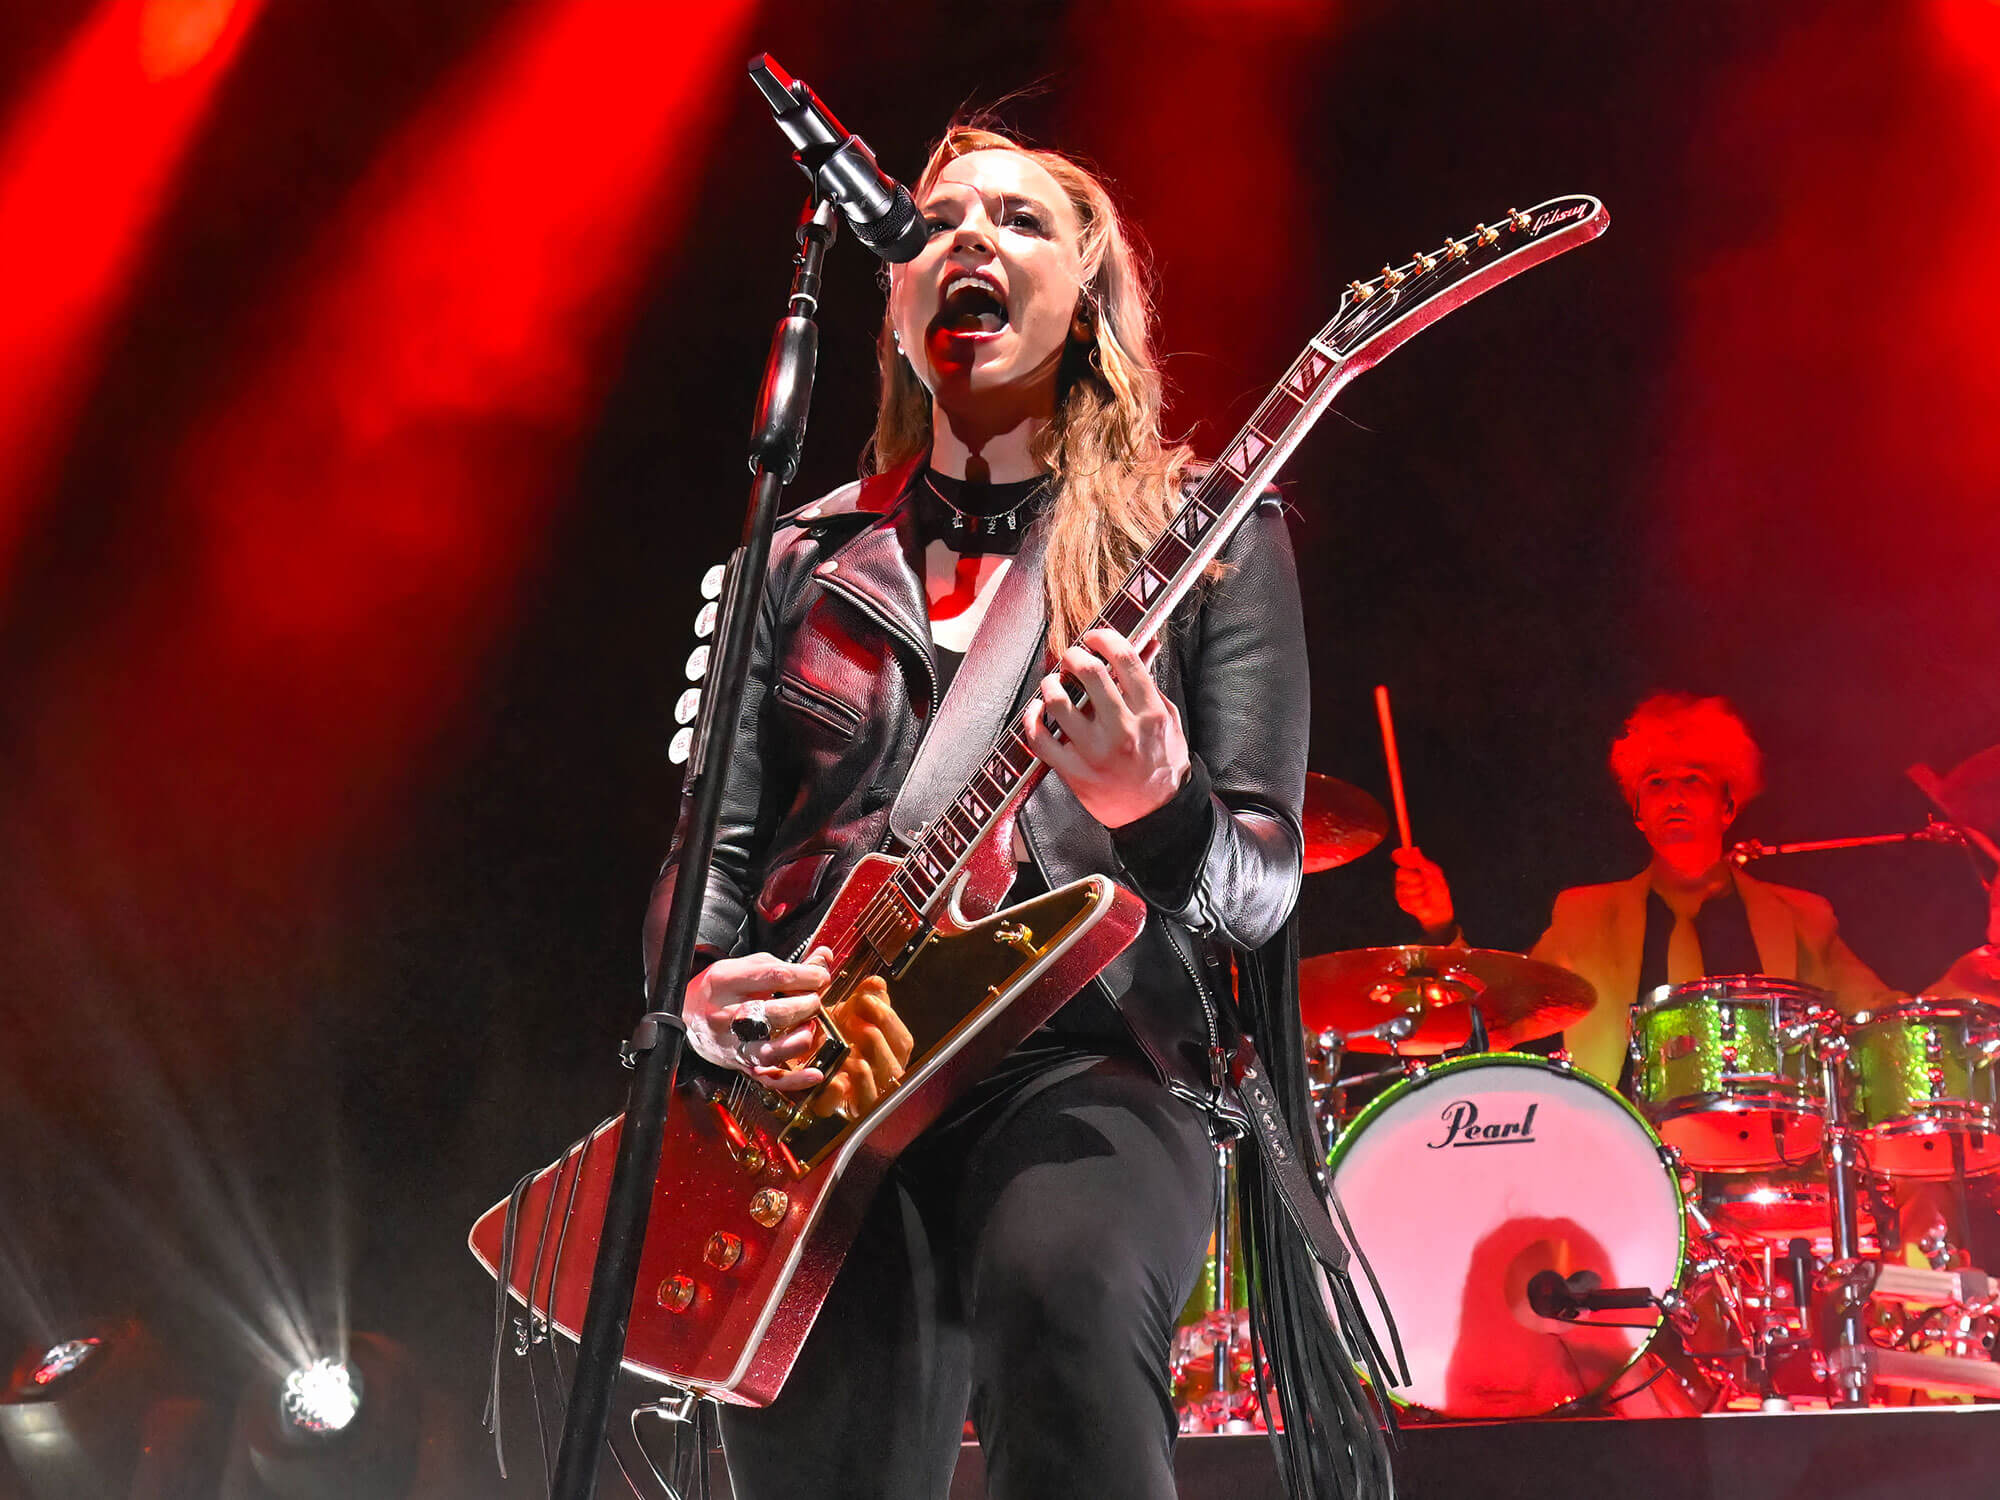 Lzzy Hale performing onstage